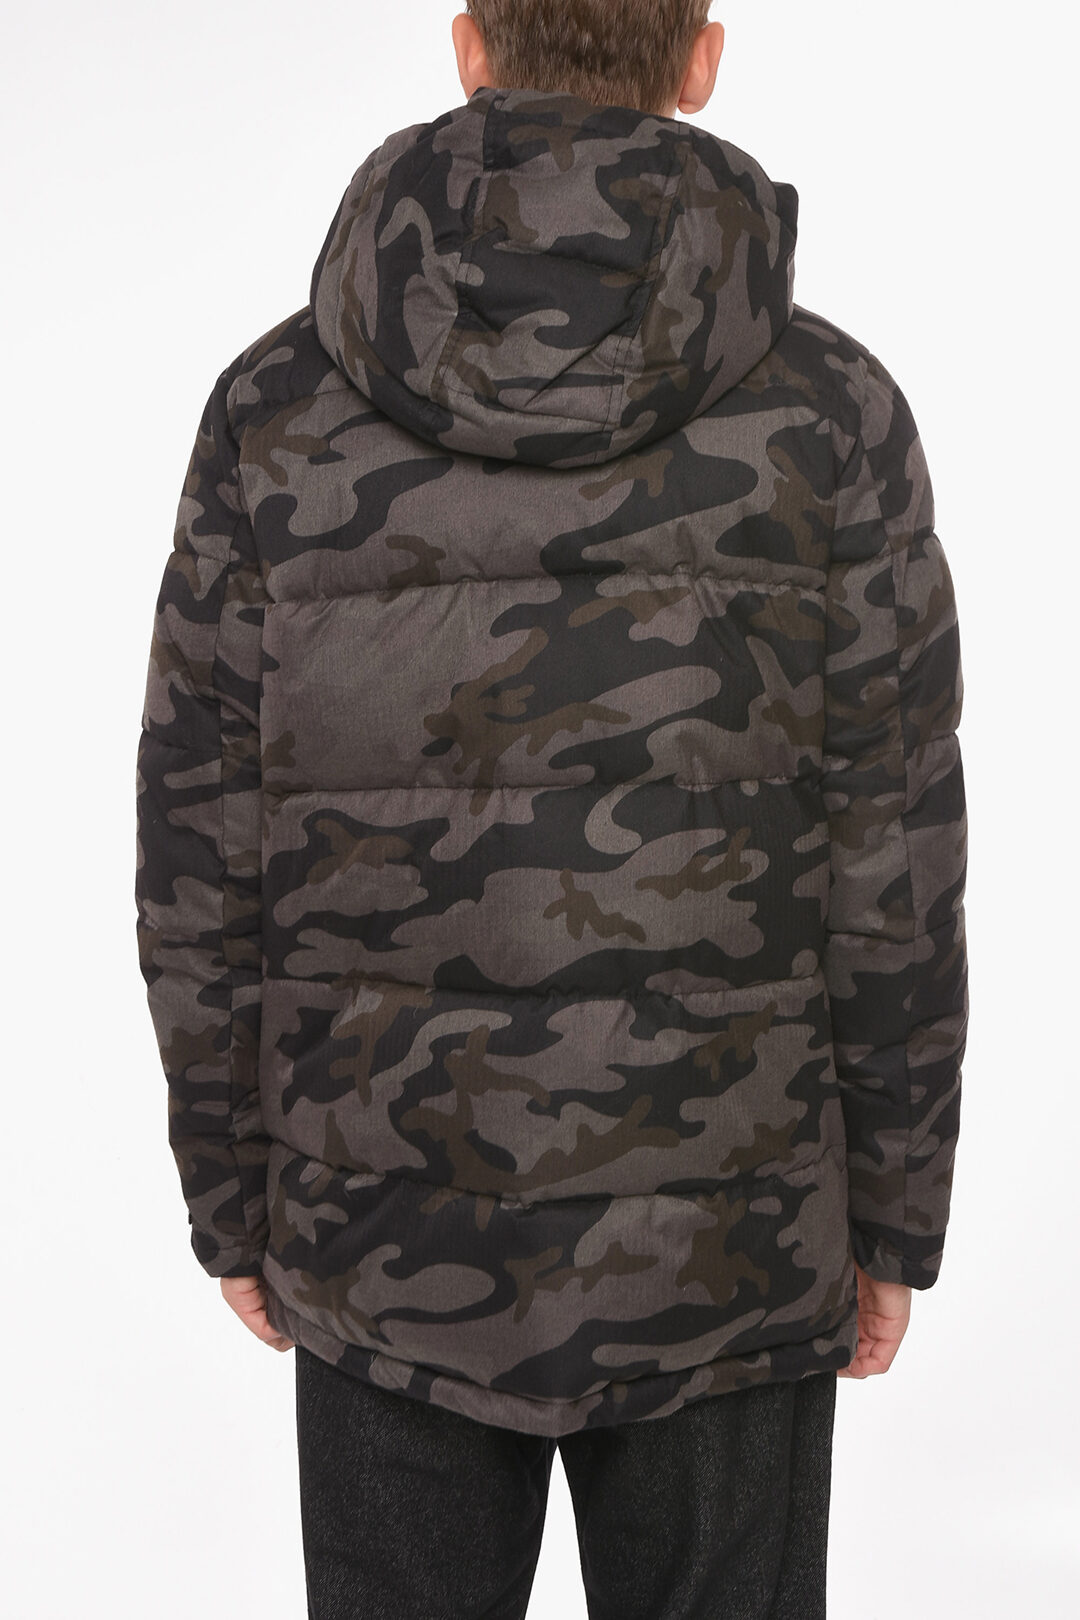 Woolrich PENN-RICH Padded Parka with Camouflage Pattern men - Glamood ...